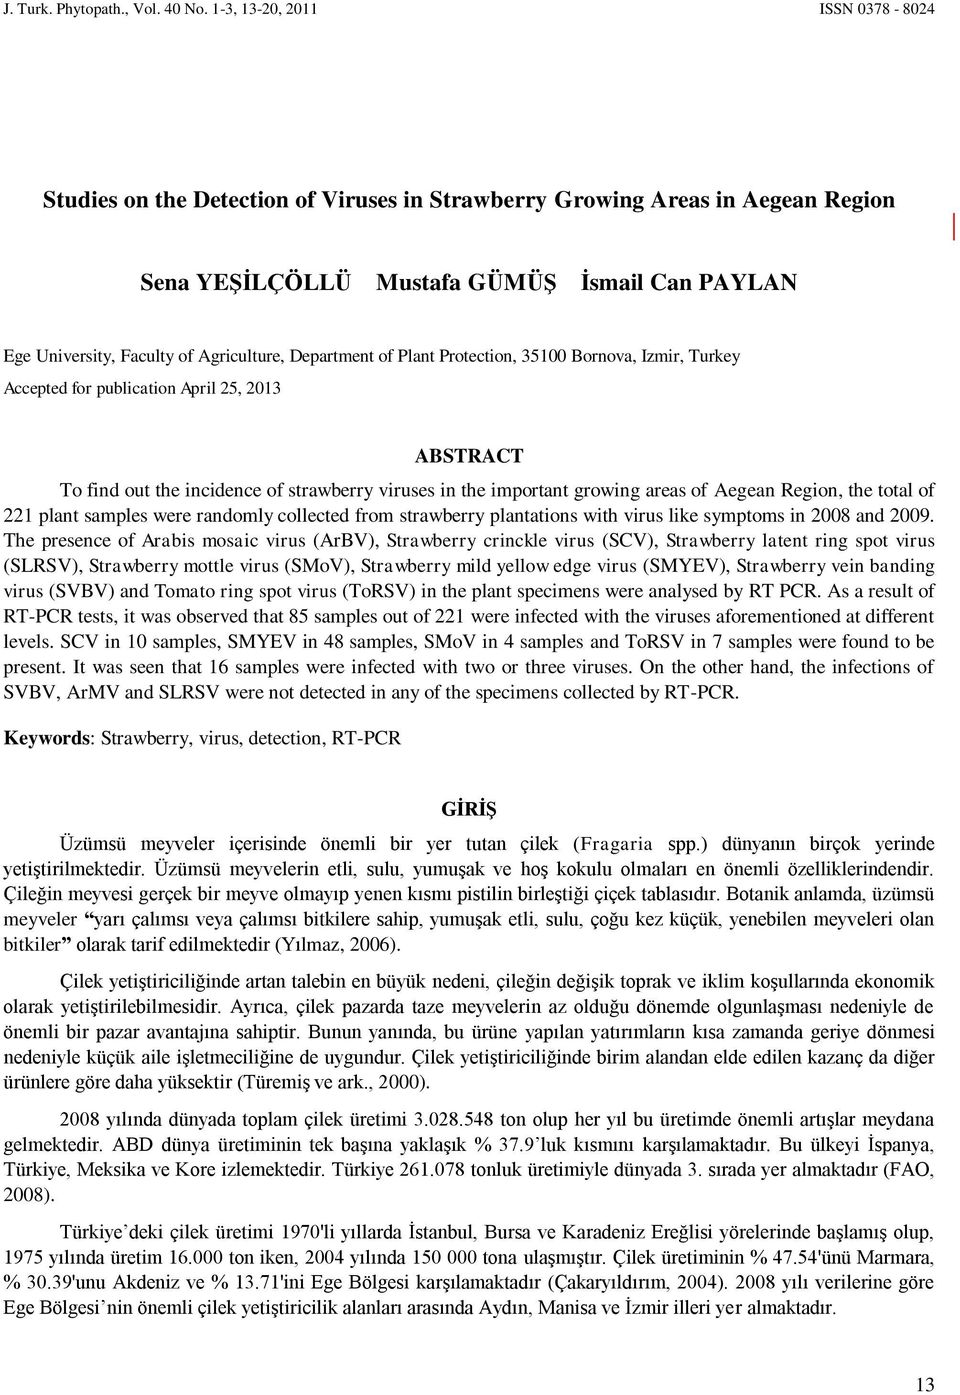 Agriculture, Department of Plant Protection, 35100 Bornova, Izmir, Turkey Accepted for publication April 25, 2013 ABSTRACT To find out the incidence of strawberry viruses in the important growing